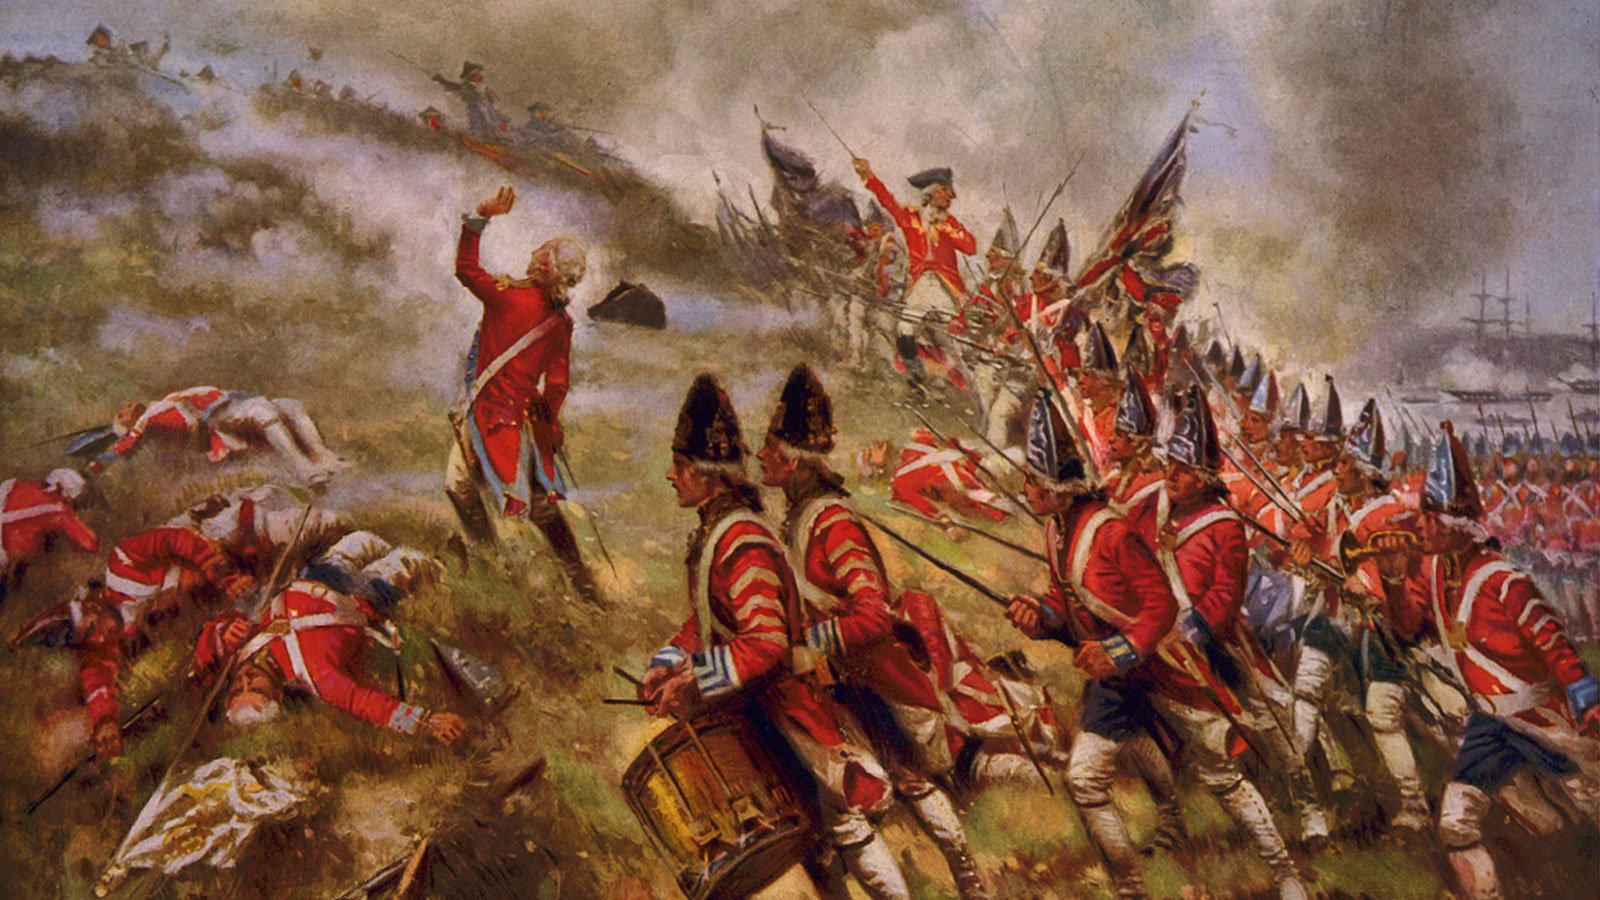 Battle of Bunker Hill, painted by E. Percy Moran